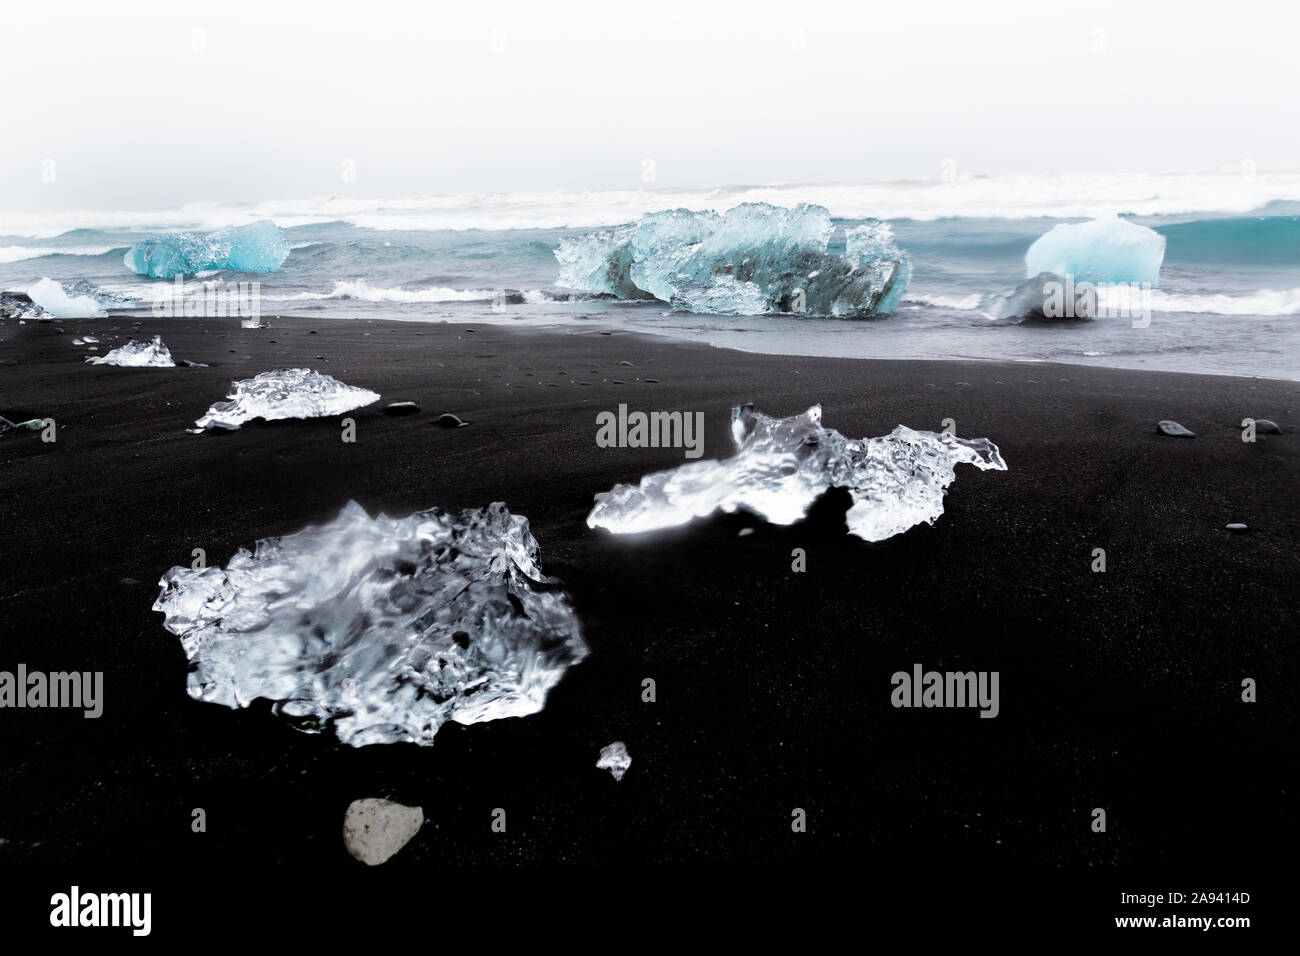 Glistening chunks of ice wash up on a lava black sand beach in the North Atlantic, giving the appearance of diamonds on the beach at Jokulsarlon glaci Stock Photo